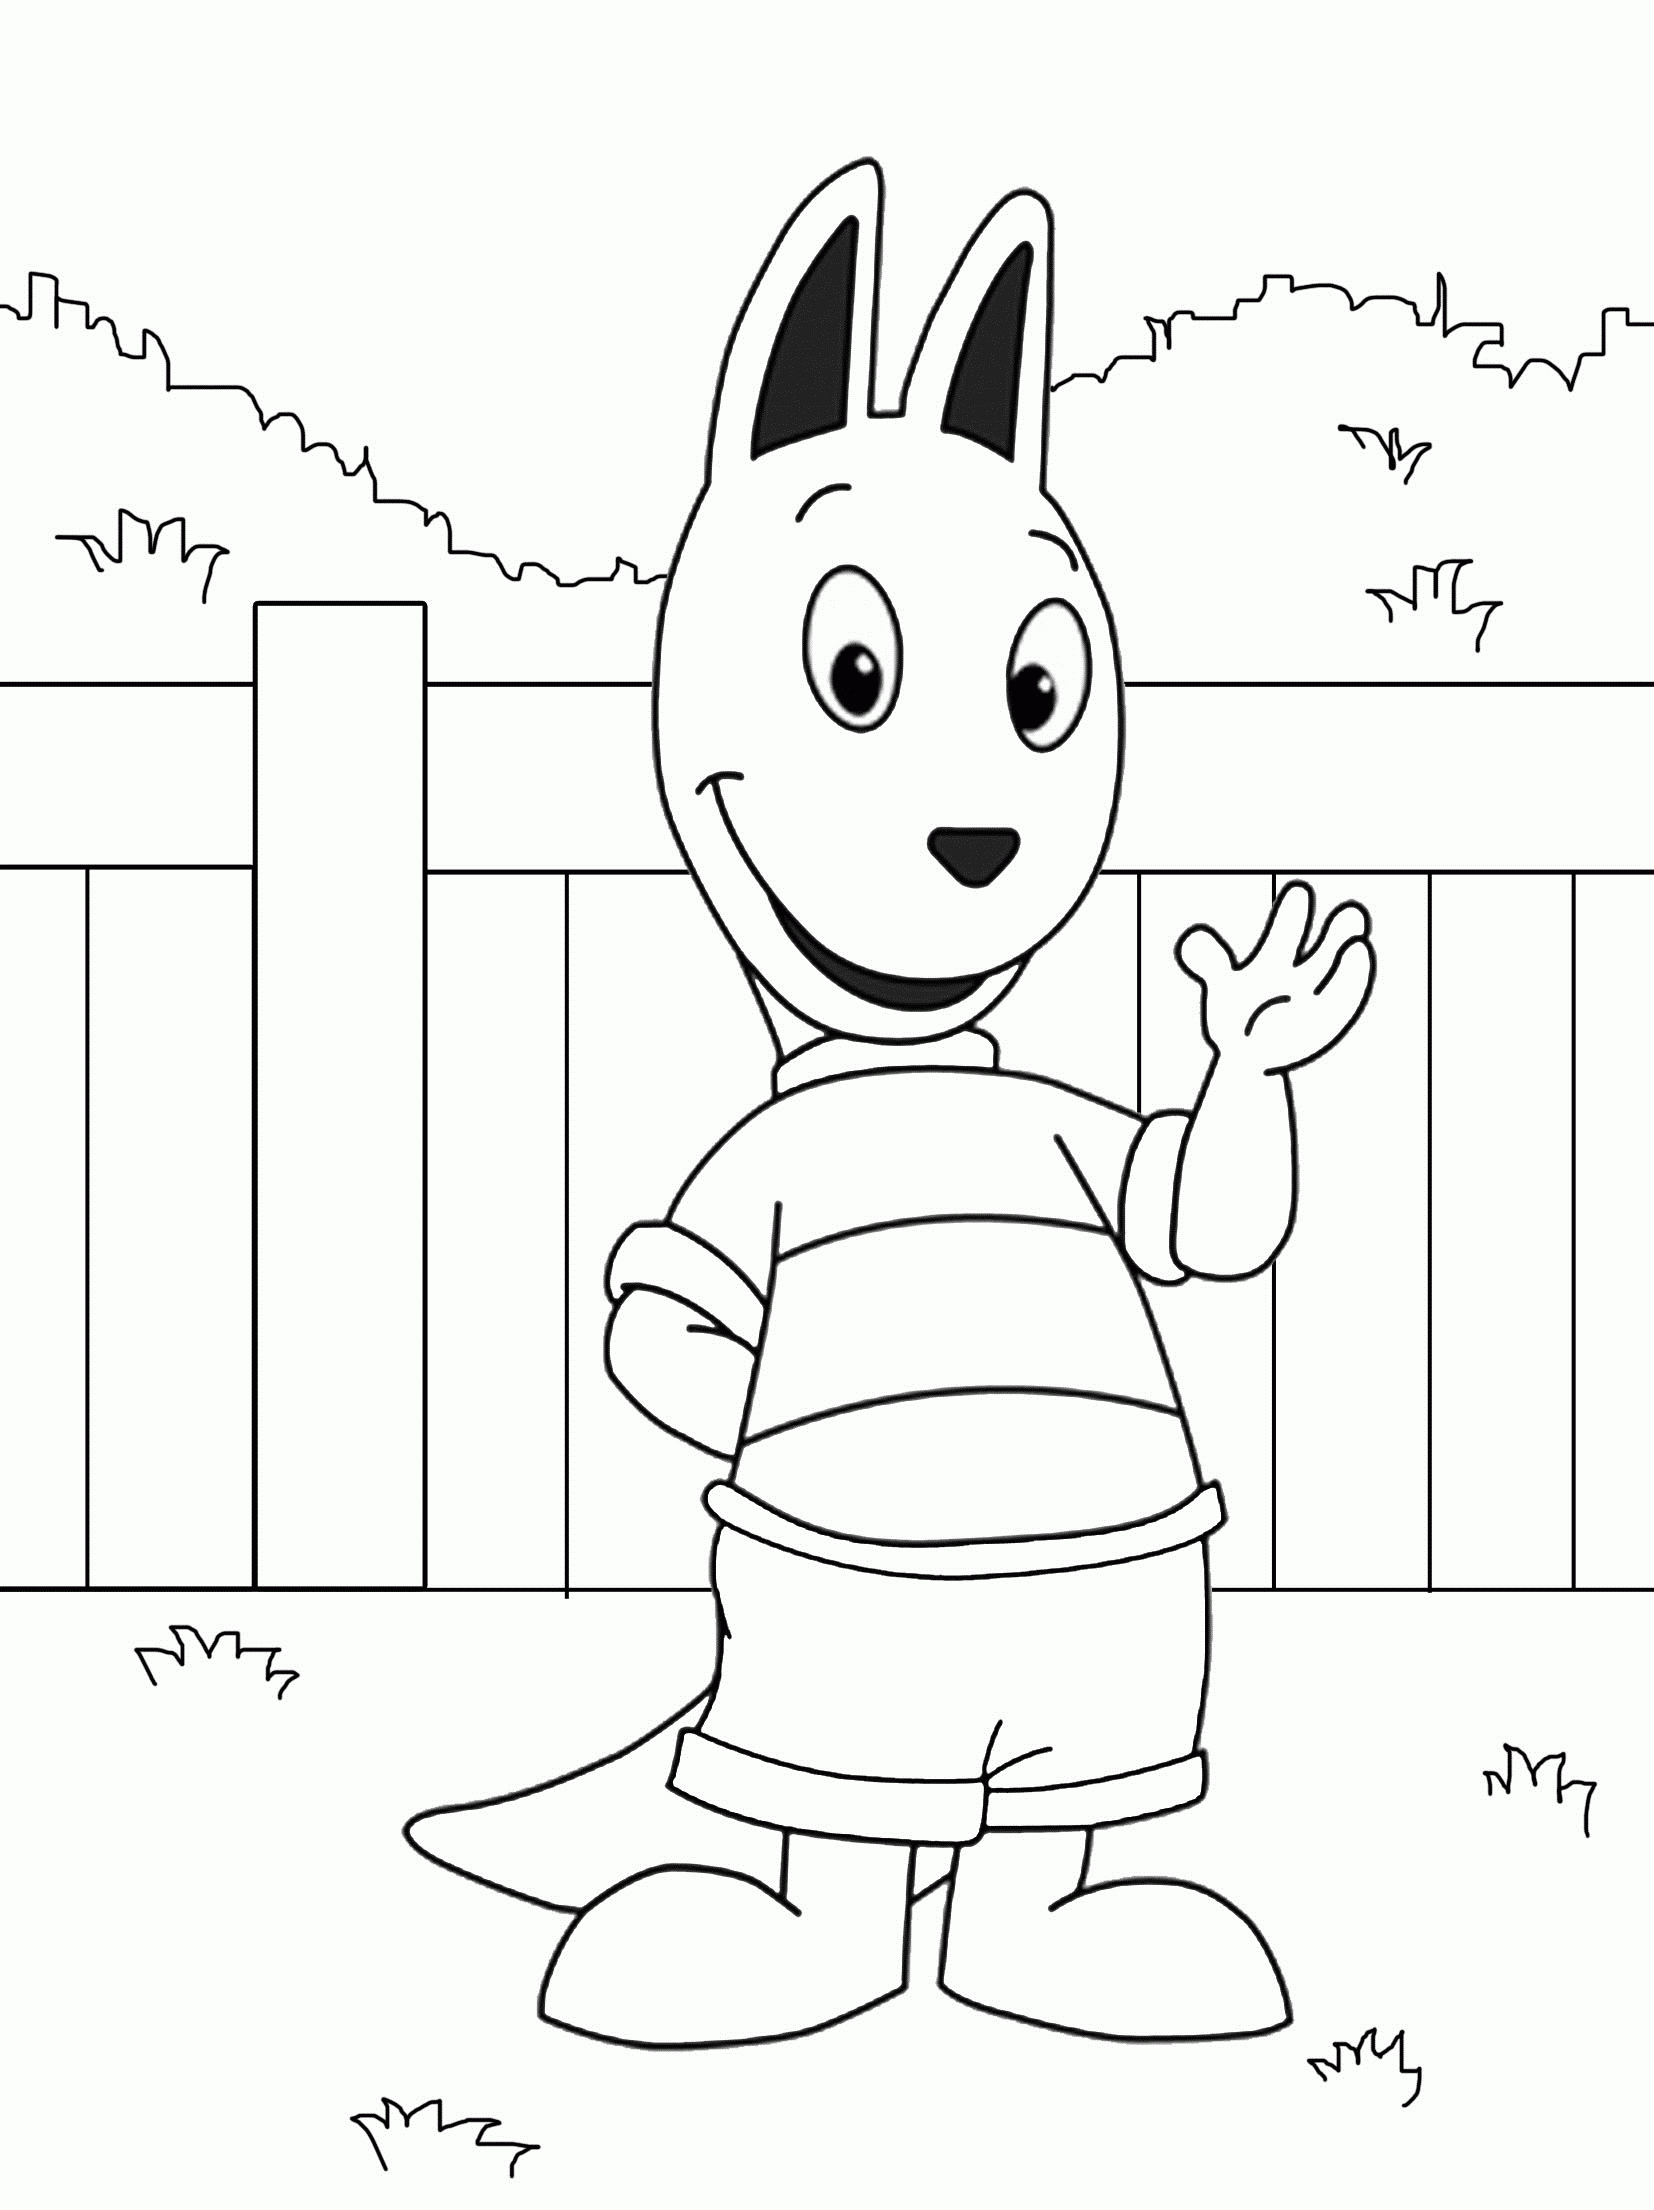 The Backyardigans Coloring Page Wecoloringpage Coloring Pages For Images